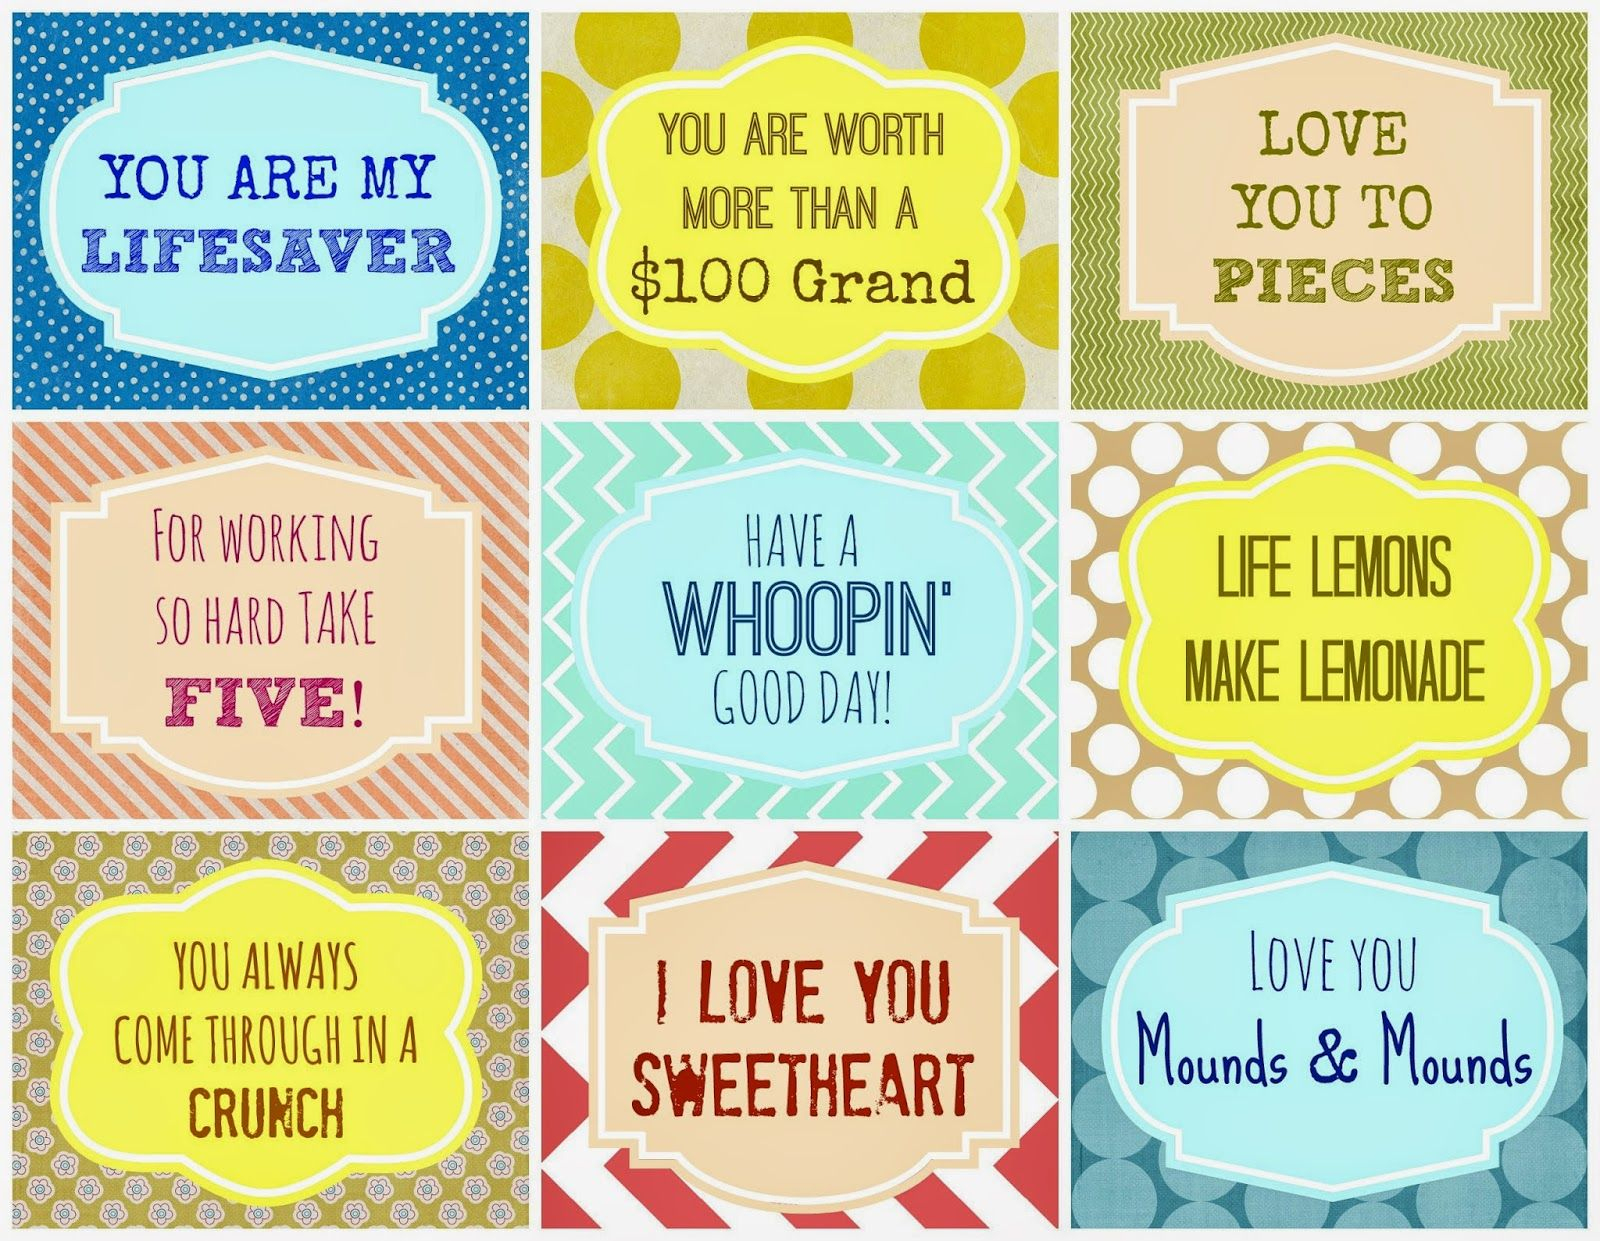 Candy Grams {Free Printable} | Spp | Pinterest | Candy Grams, Candy - Free Printable Lifesaver Tags